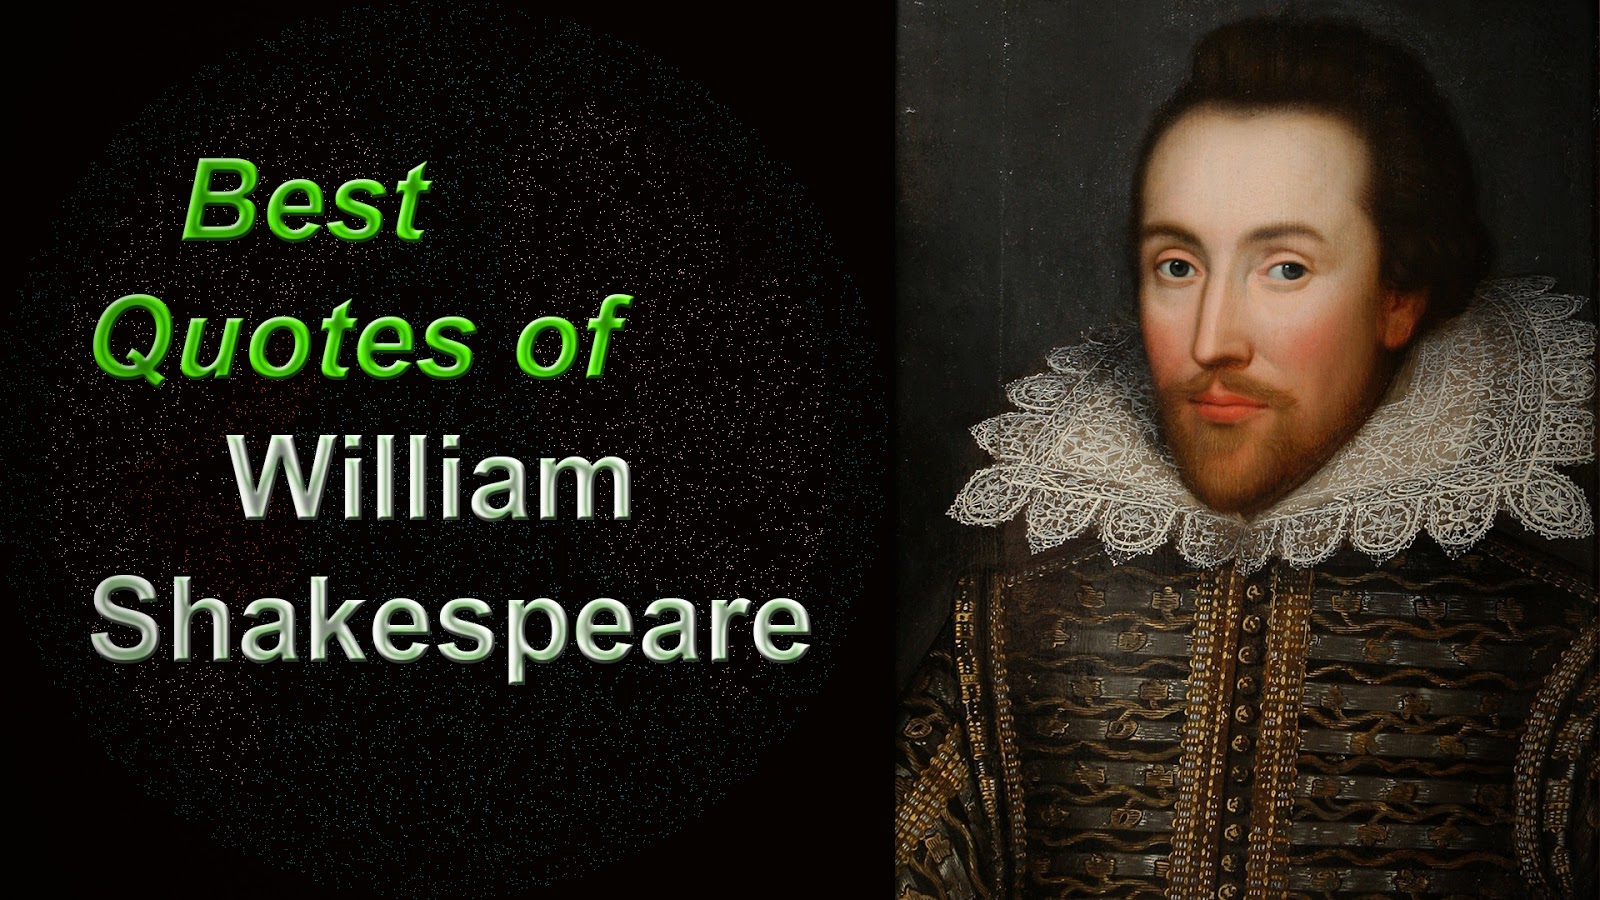 You are currently viewing Best Quotes of William Shakespeare – William Shakespeare Quotes with images in English